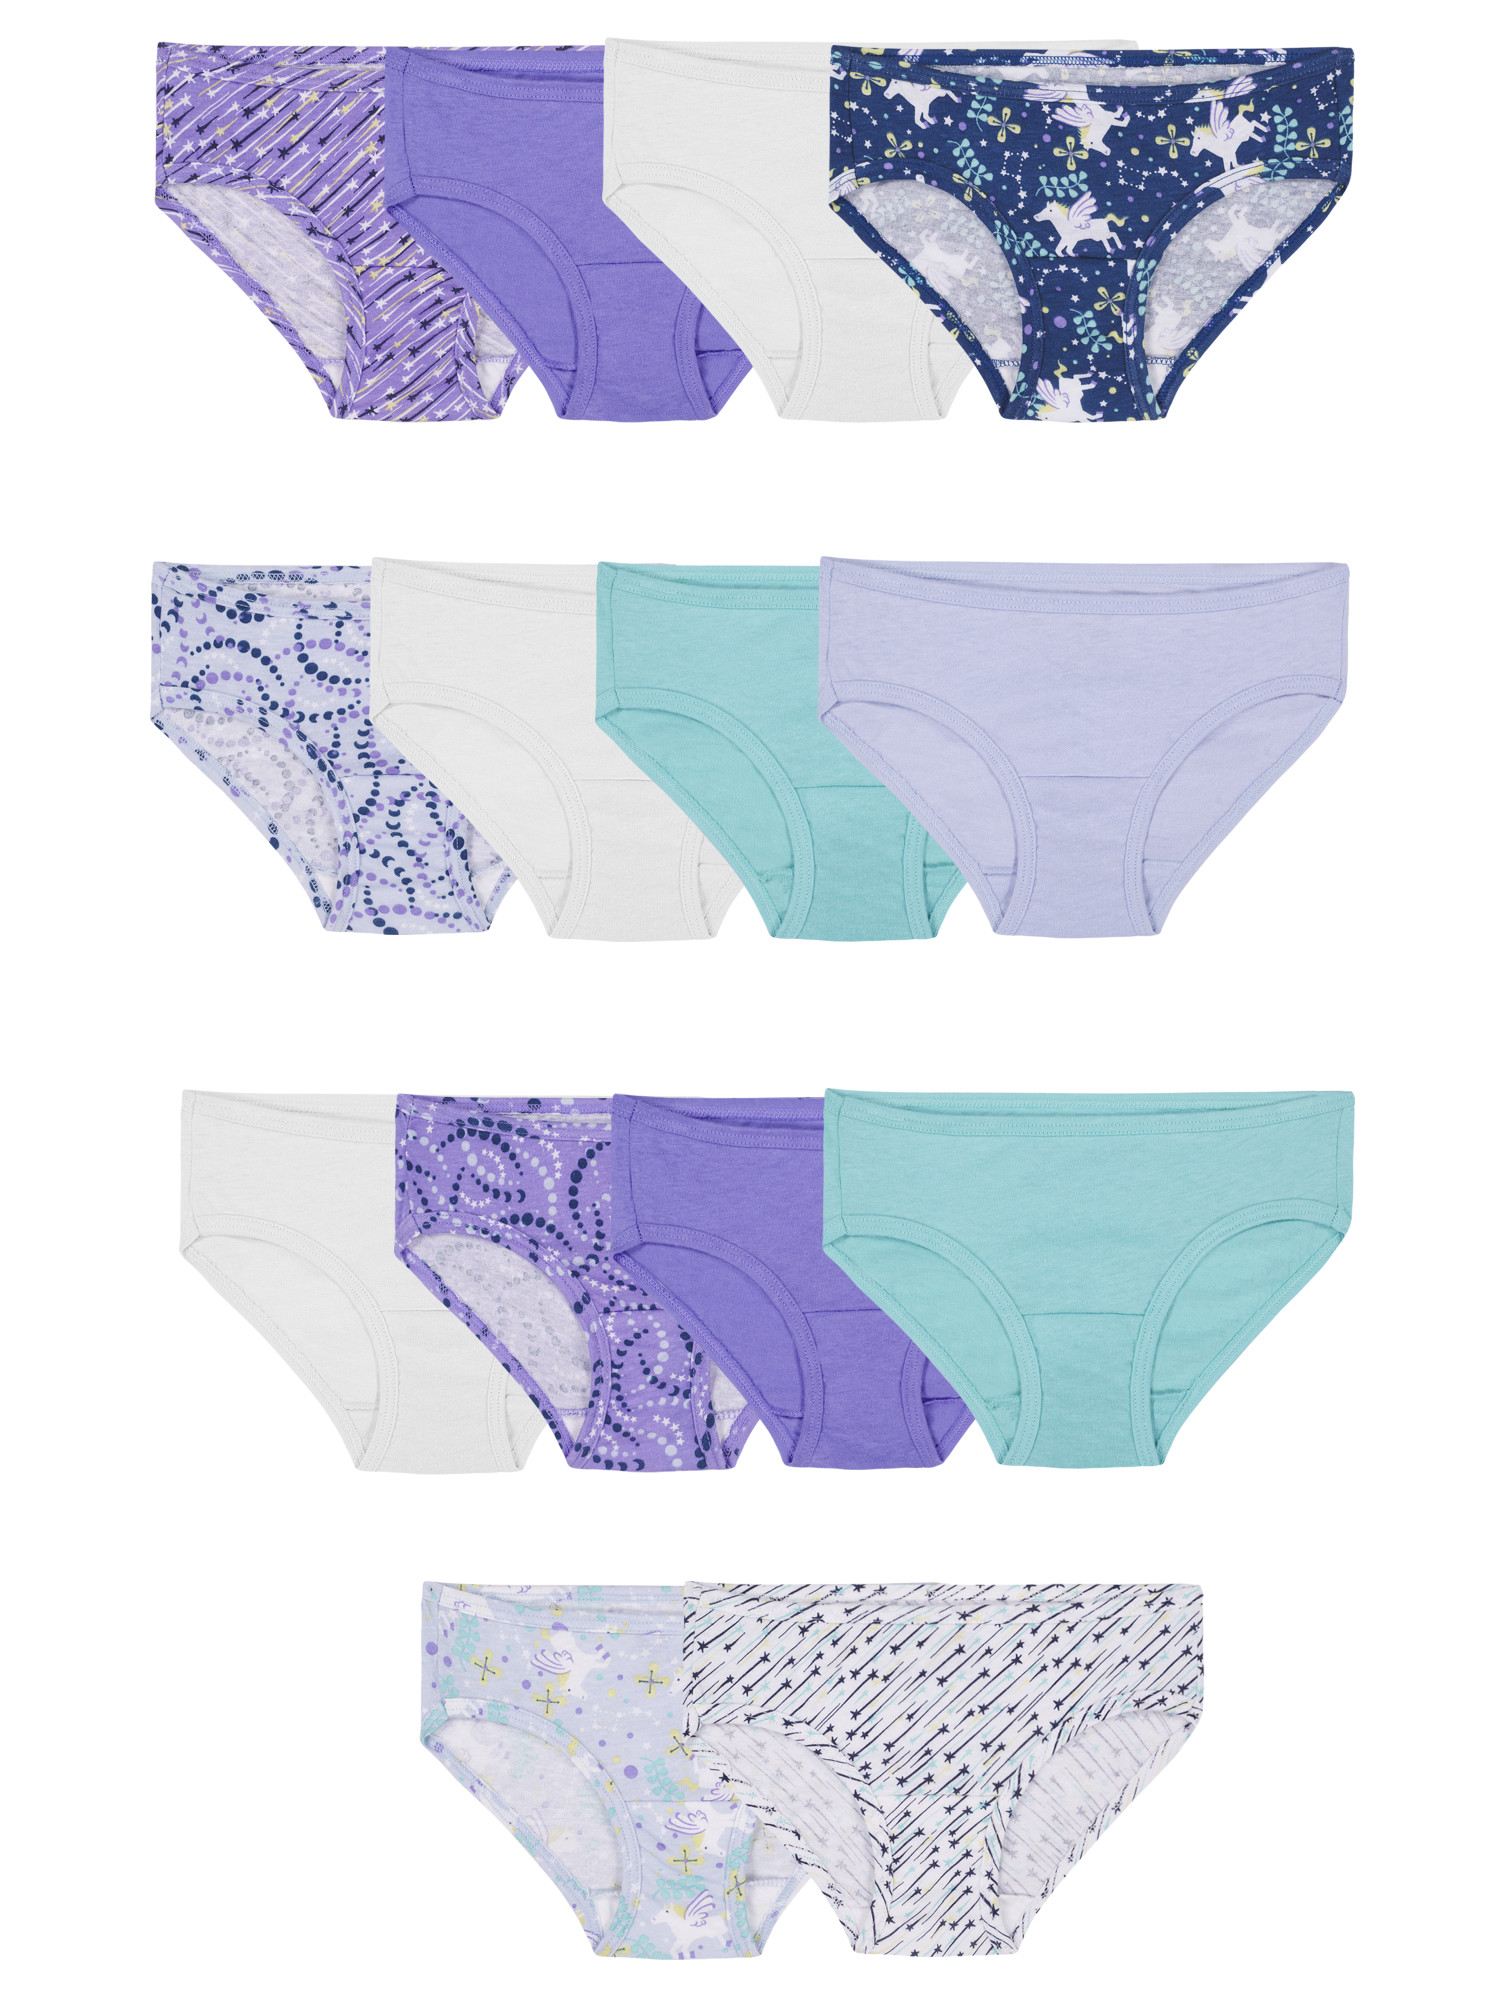 Fruit of the Loom Girls' Assorted Cotton Hipster Underwear, 14 Pack Panties Sizes 4 - 14 - image 1 of 4